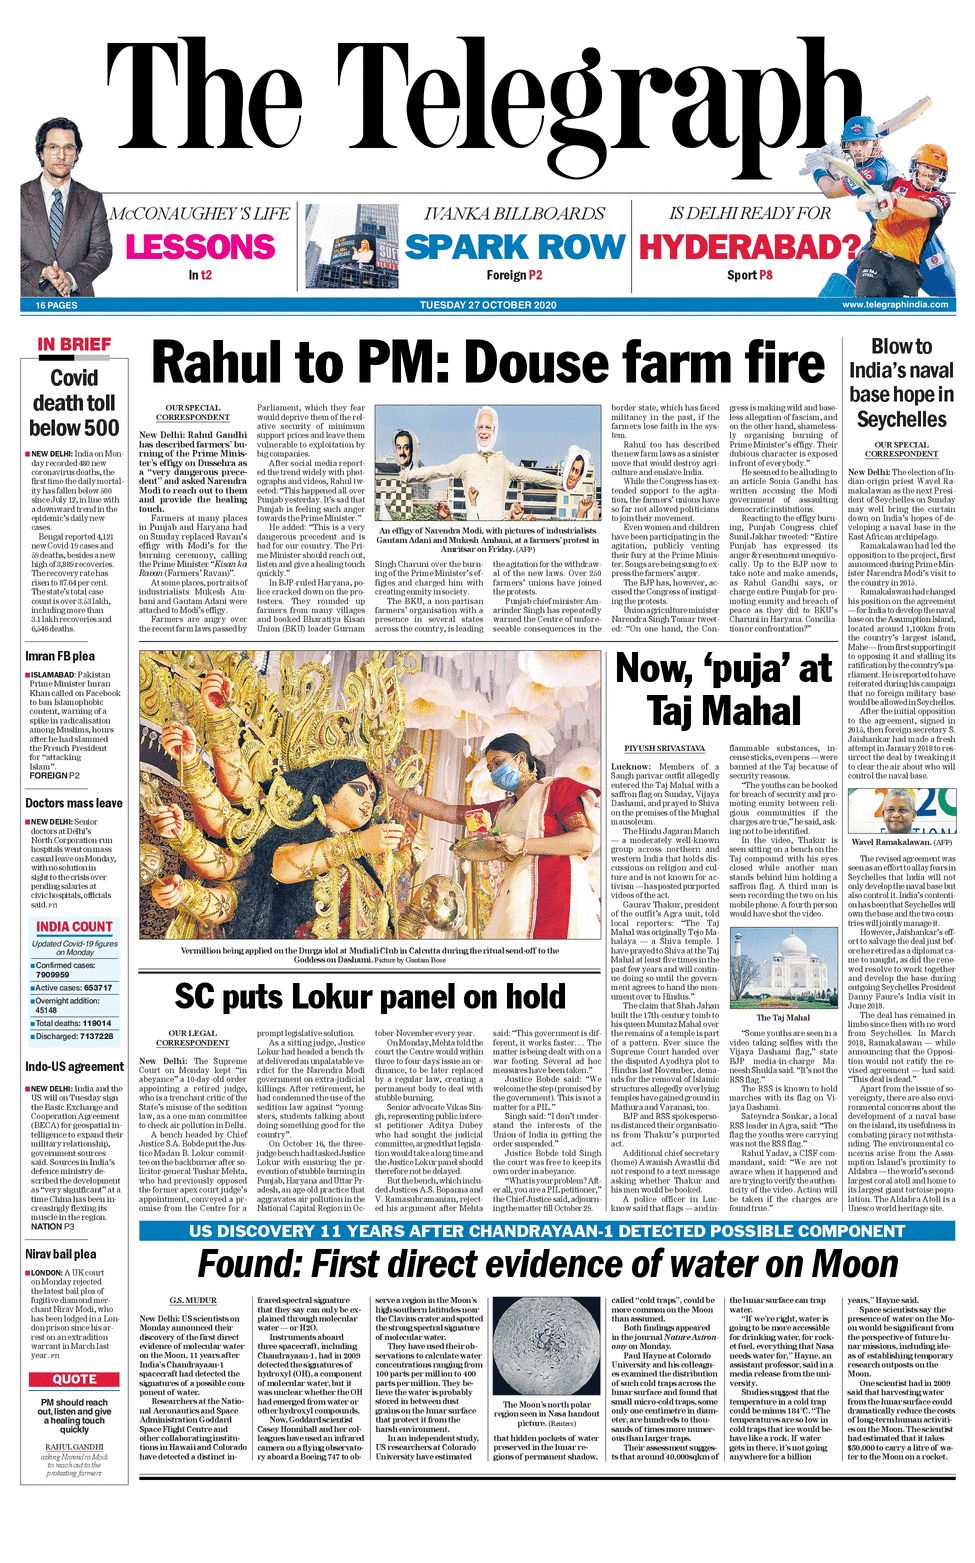 Newspaper Headlines: Will Bring Law To Tackle Pollution, Centre Tells Supreme Court And Other Top Stories